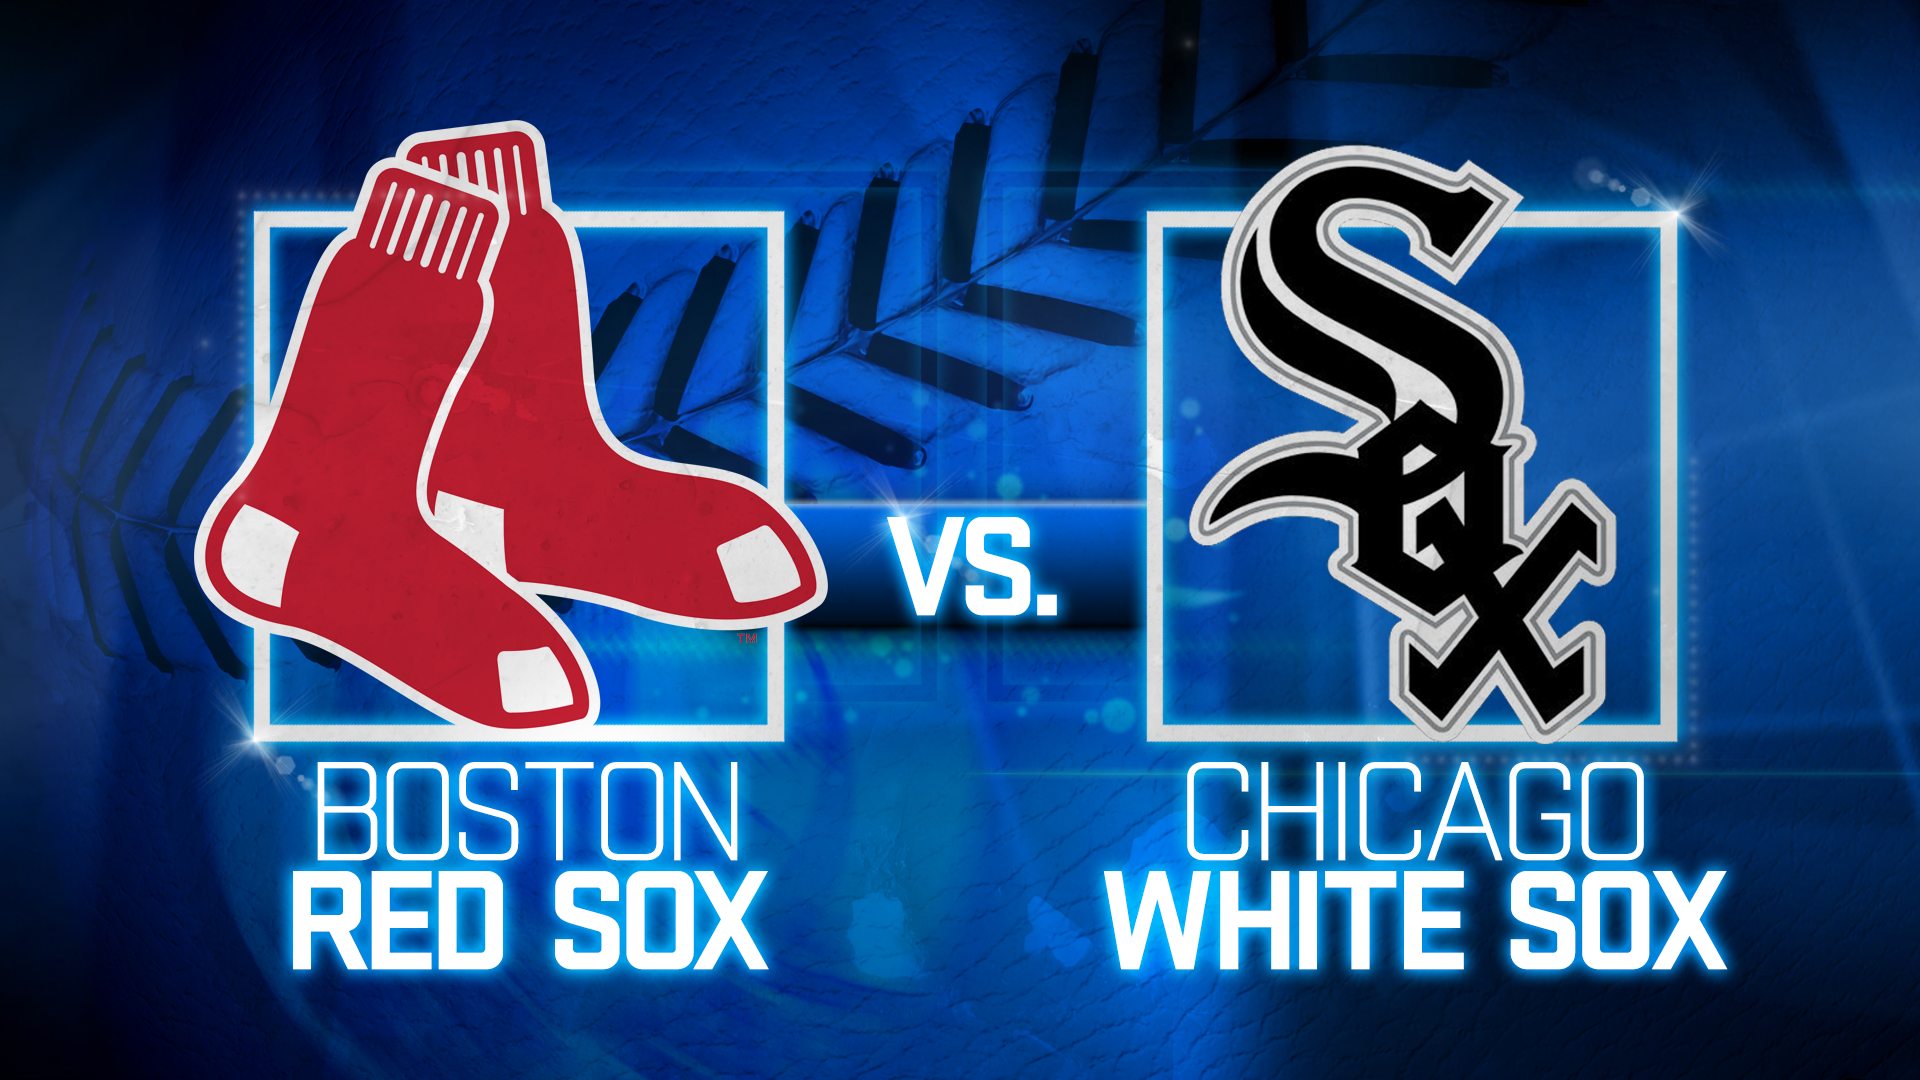 SOX WIN! - Chicago White Sox